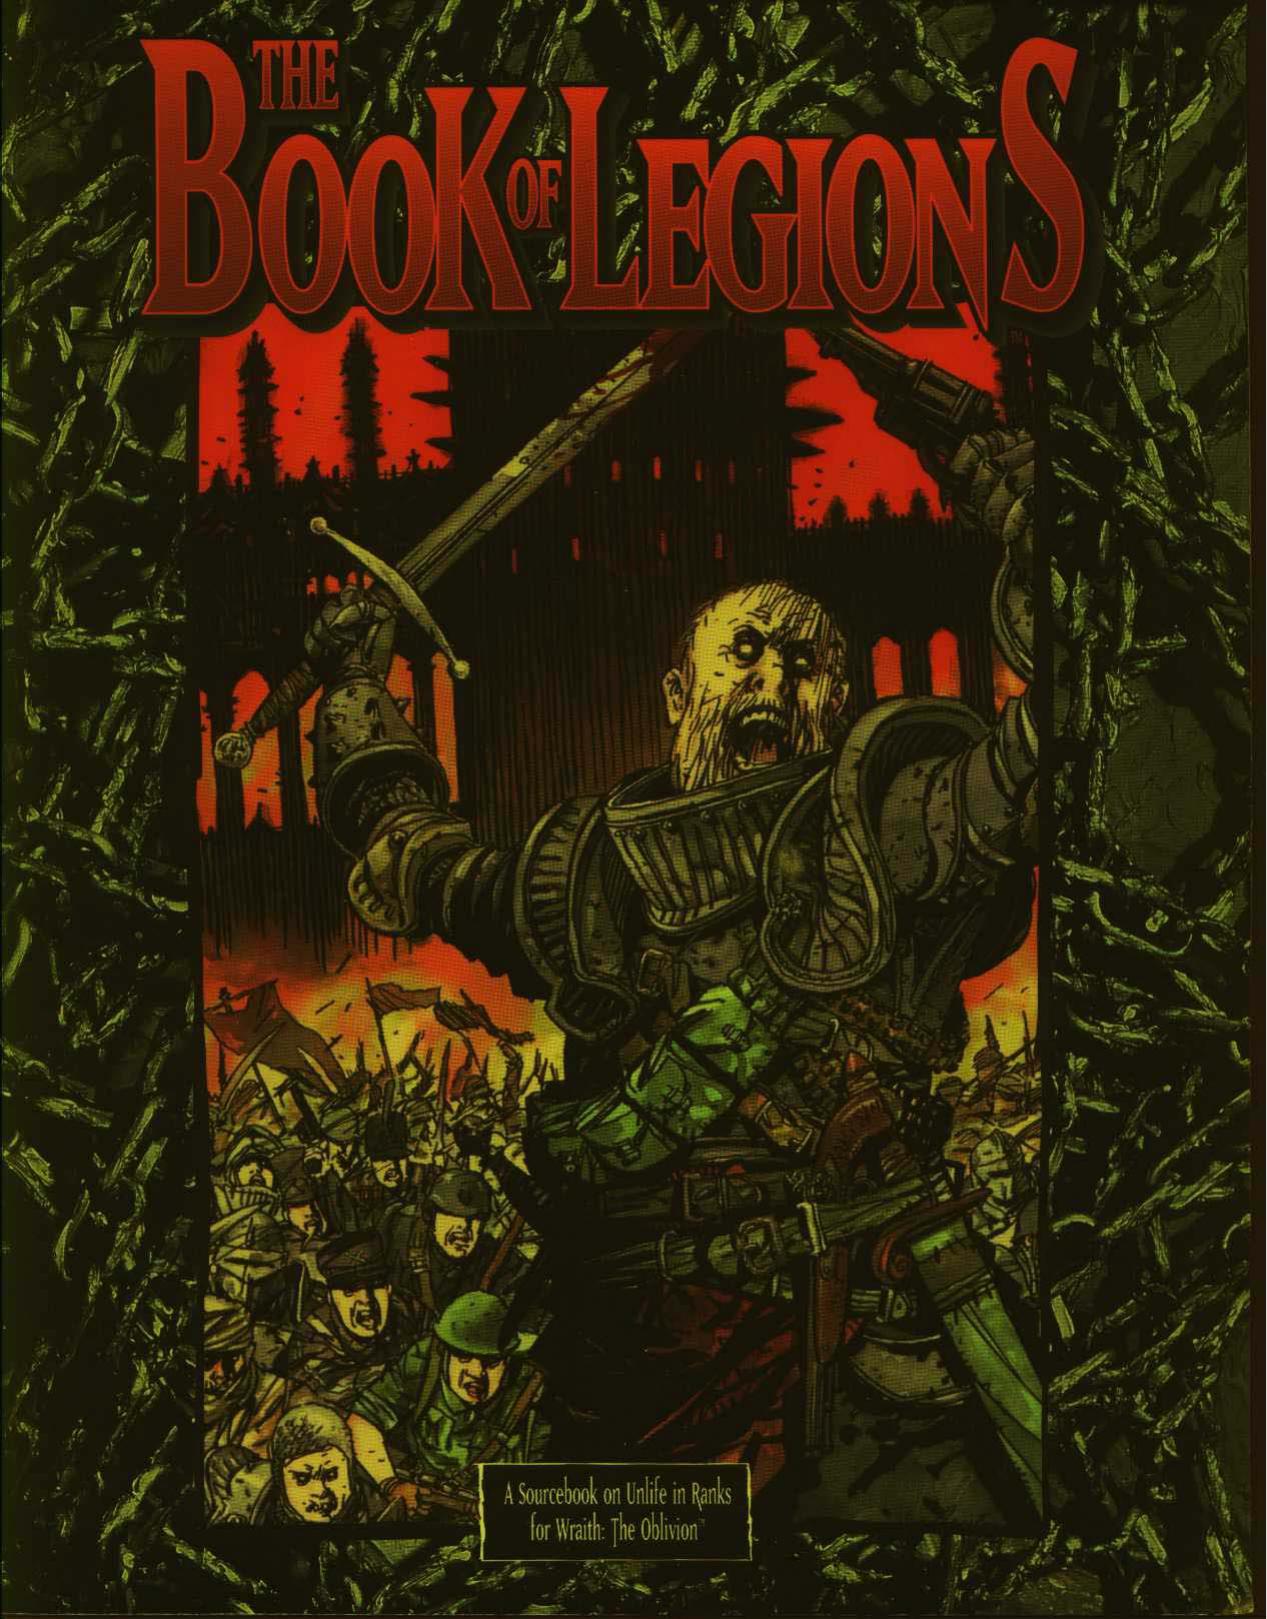 The Book of Legions (1998)